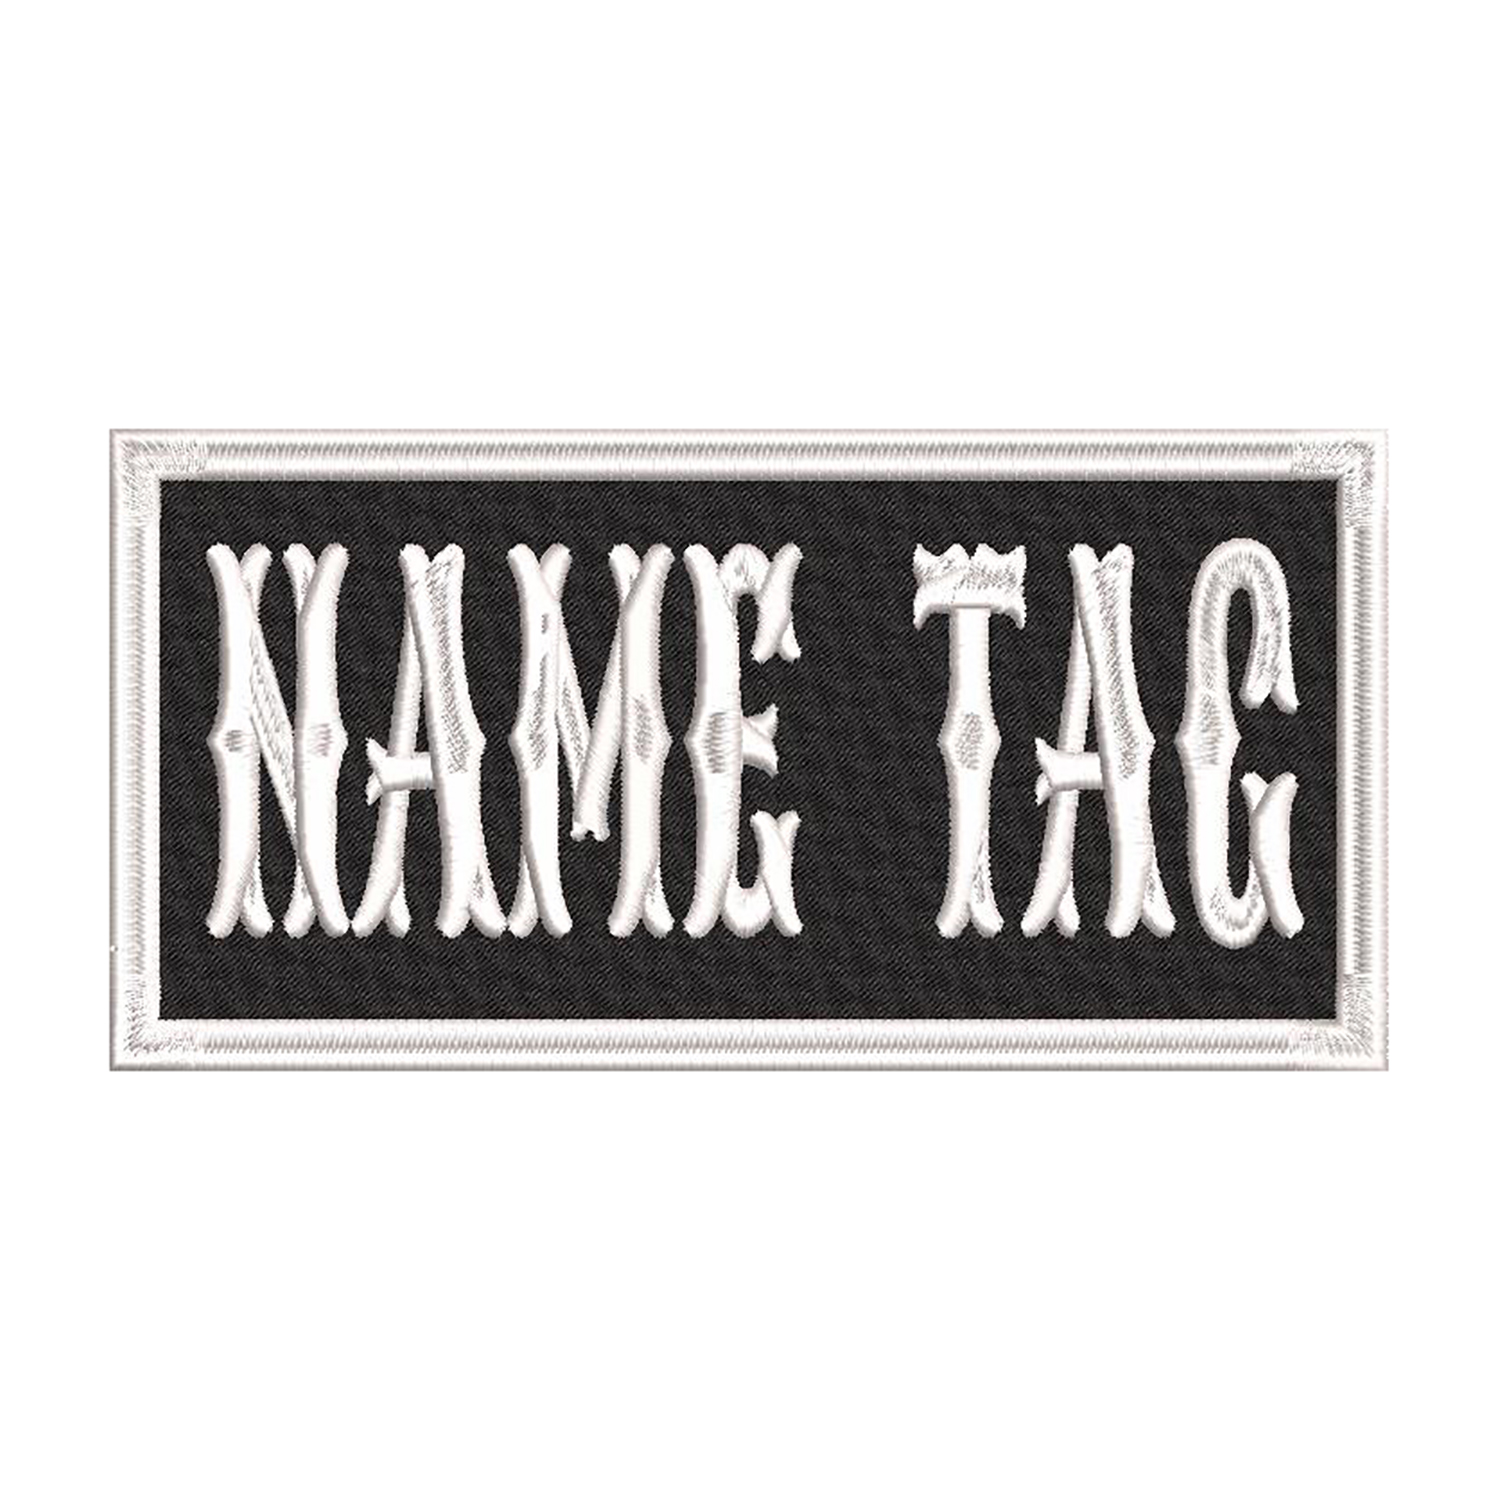 Embroidered 5 x 4 Name Tag Patch WHITE GLOW IN DARK W/ VELCRO